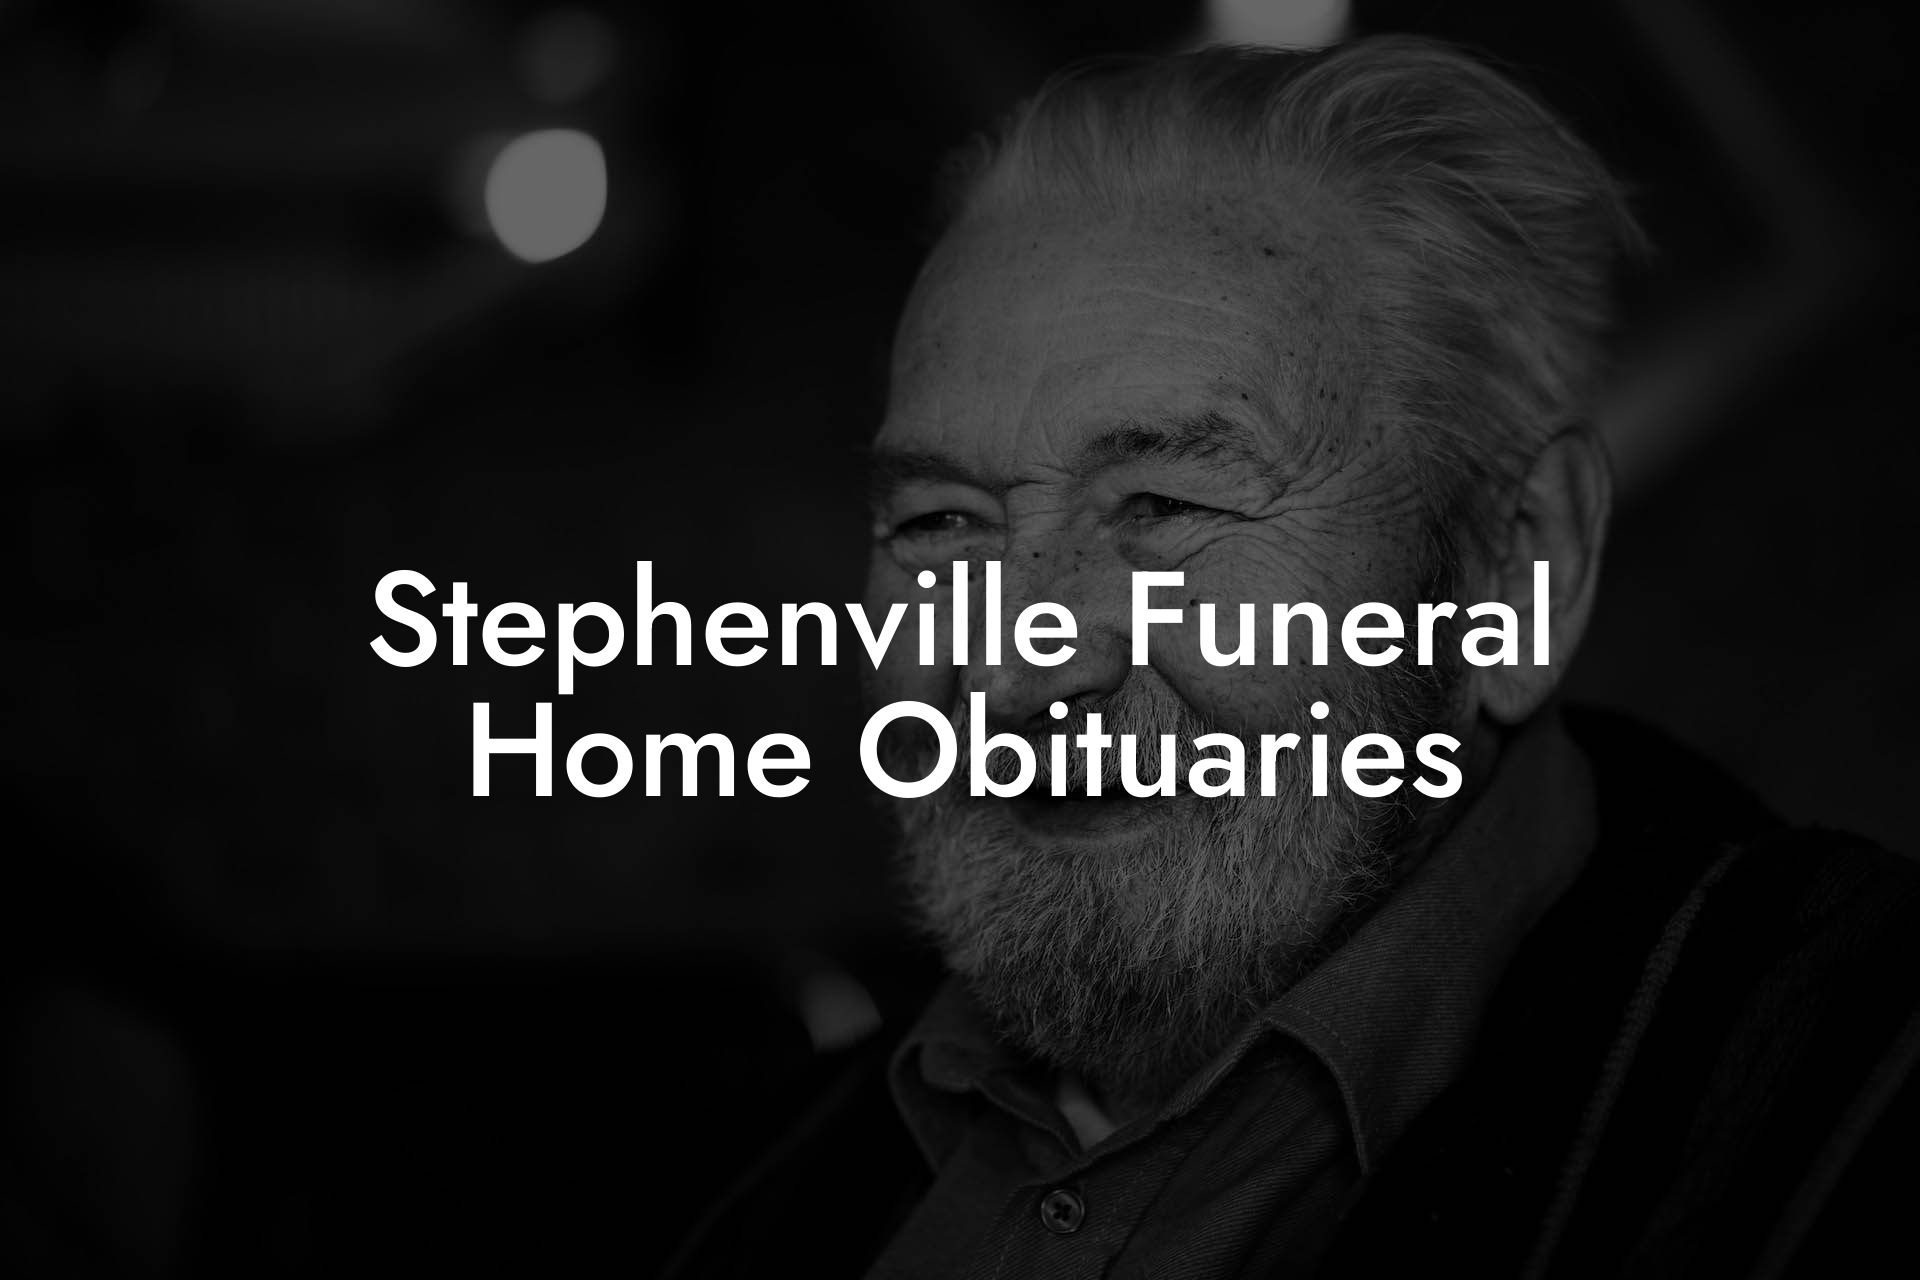 Stephenville Funeral Home Obituaries